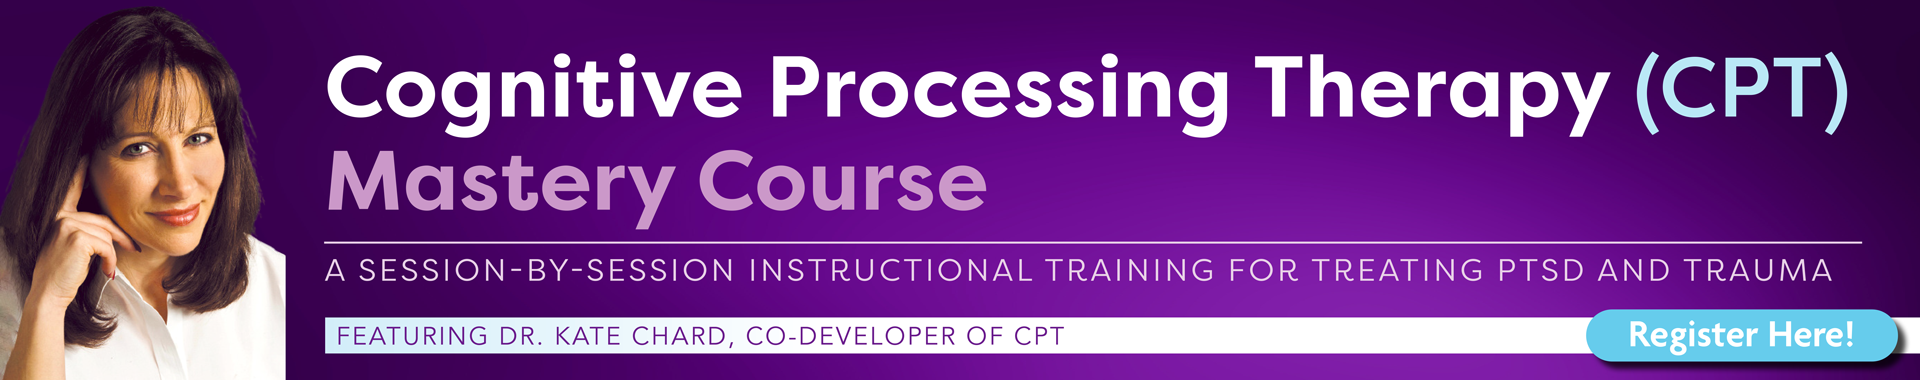 Cognitive Processing Therapy (CPT) Training: A 12-Session Treatment for PTSD, Trauma & More